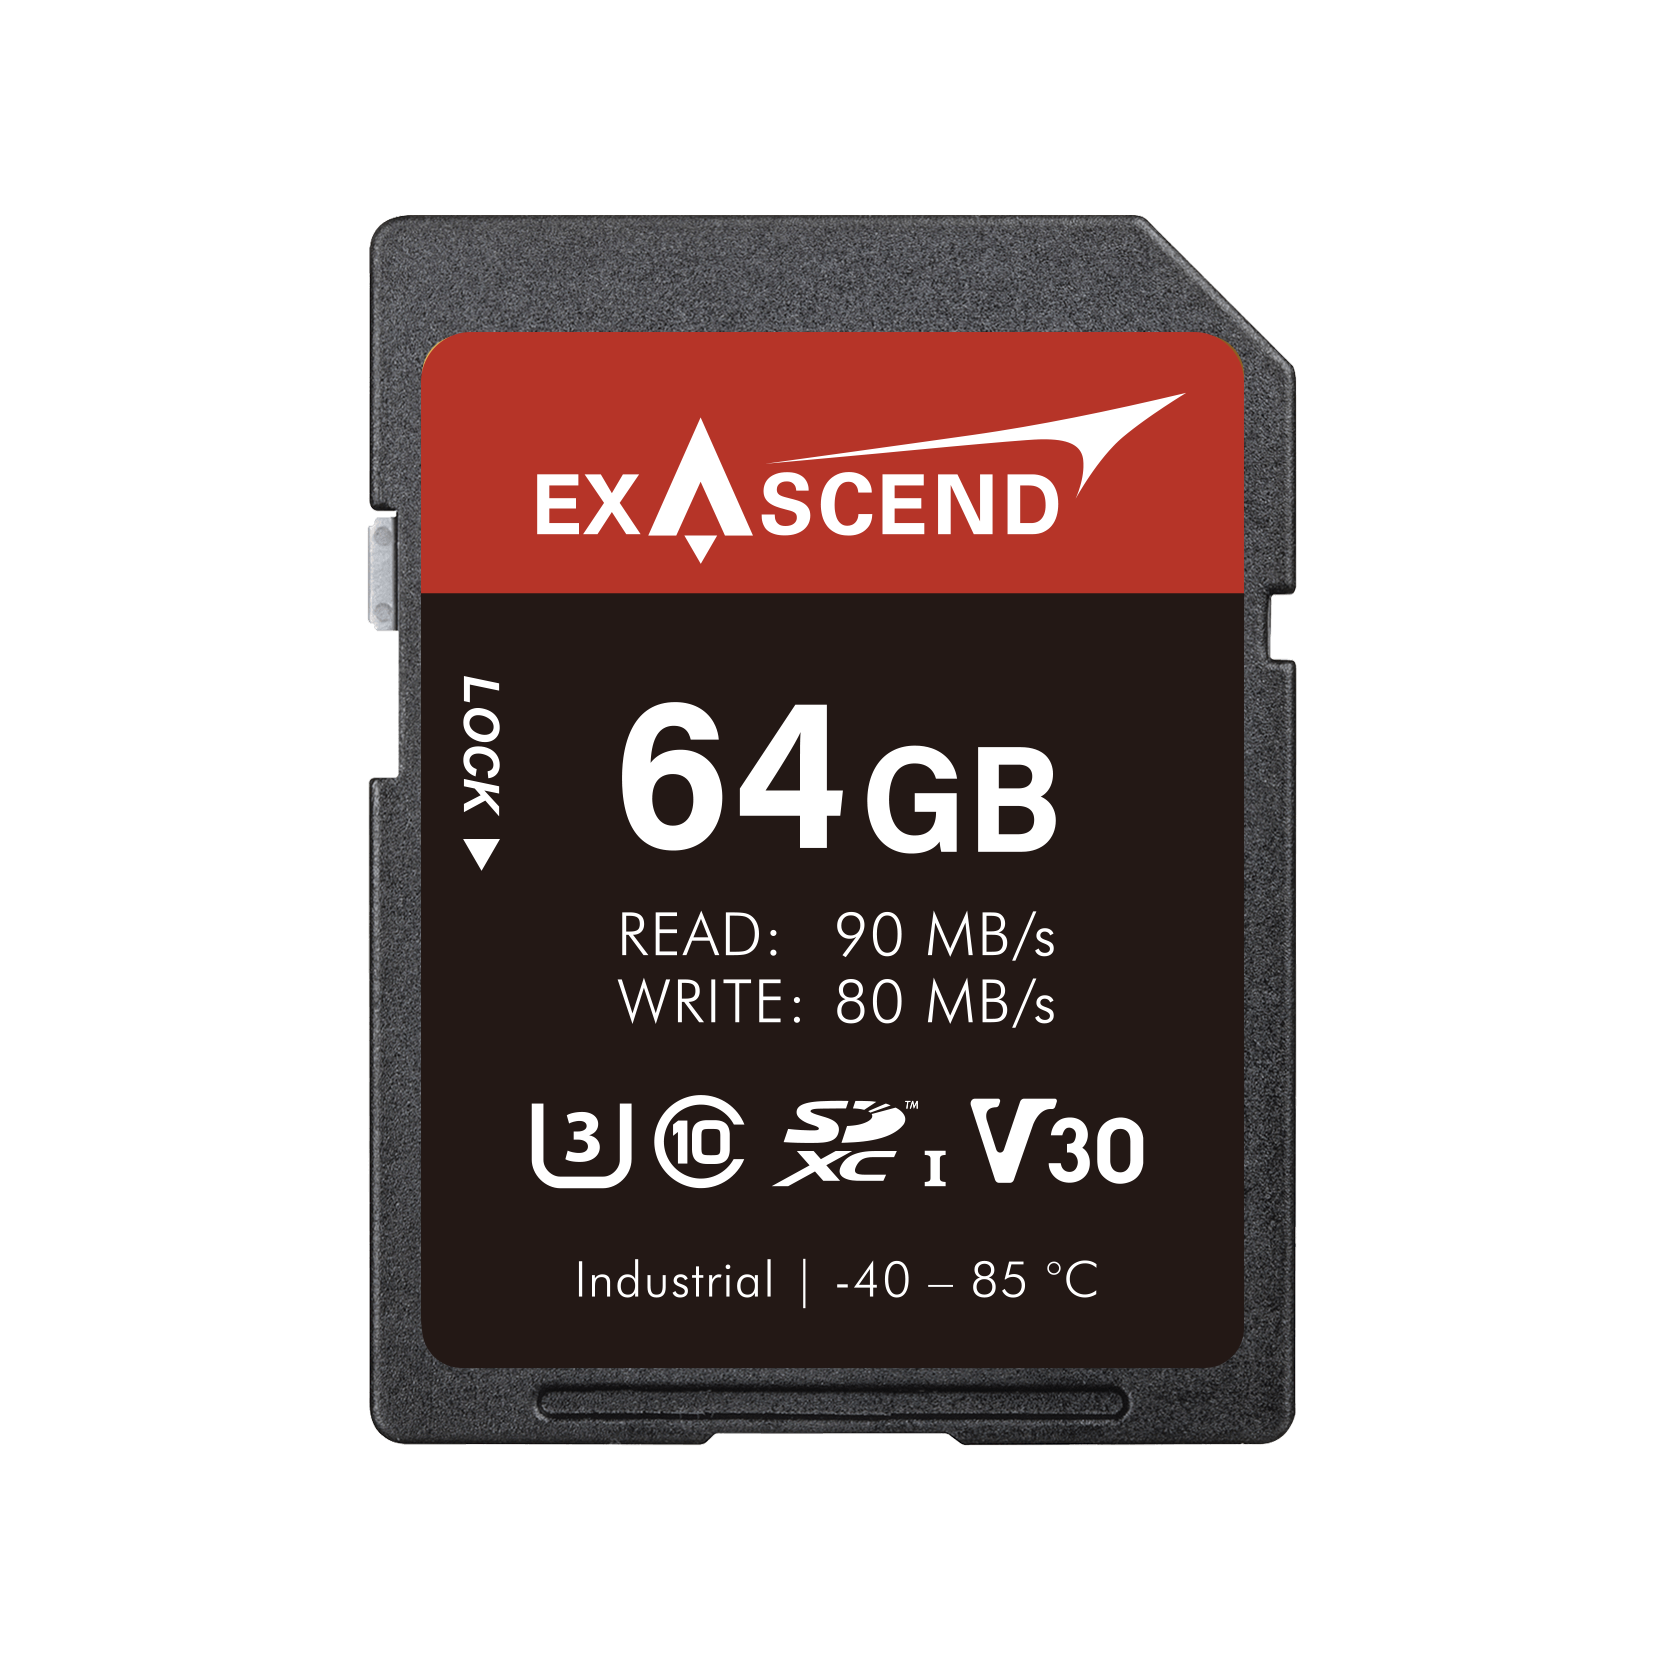 Industrial SD in 64 GB